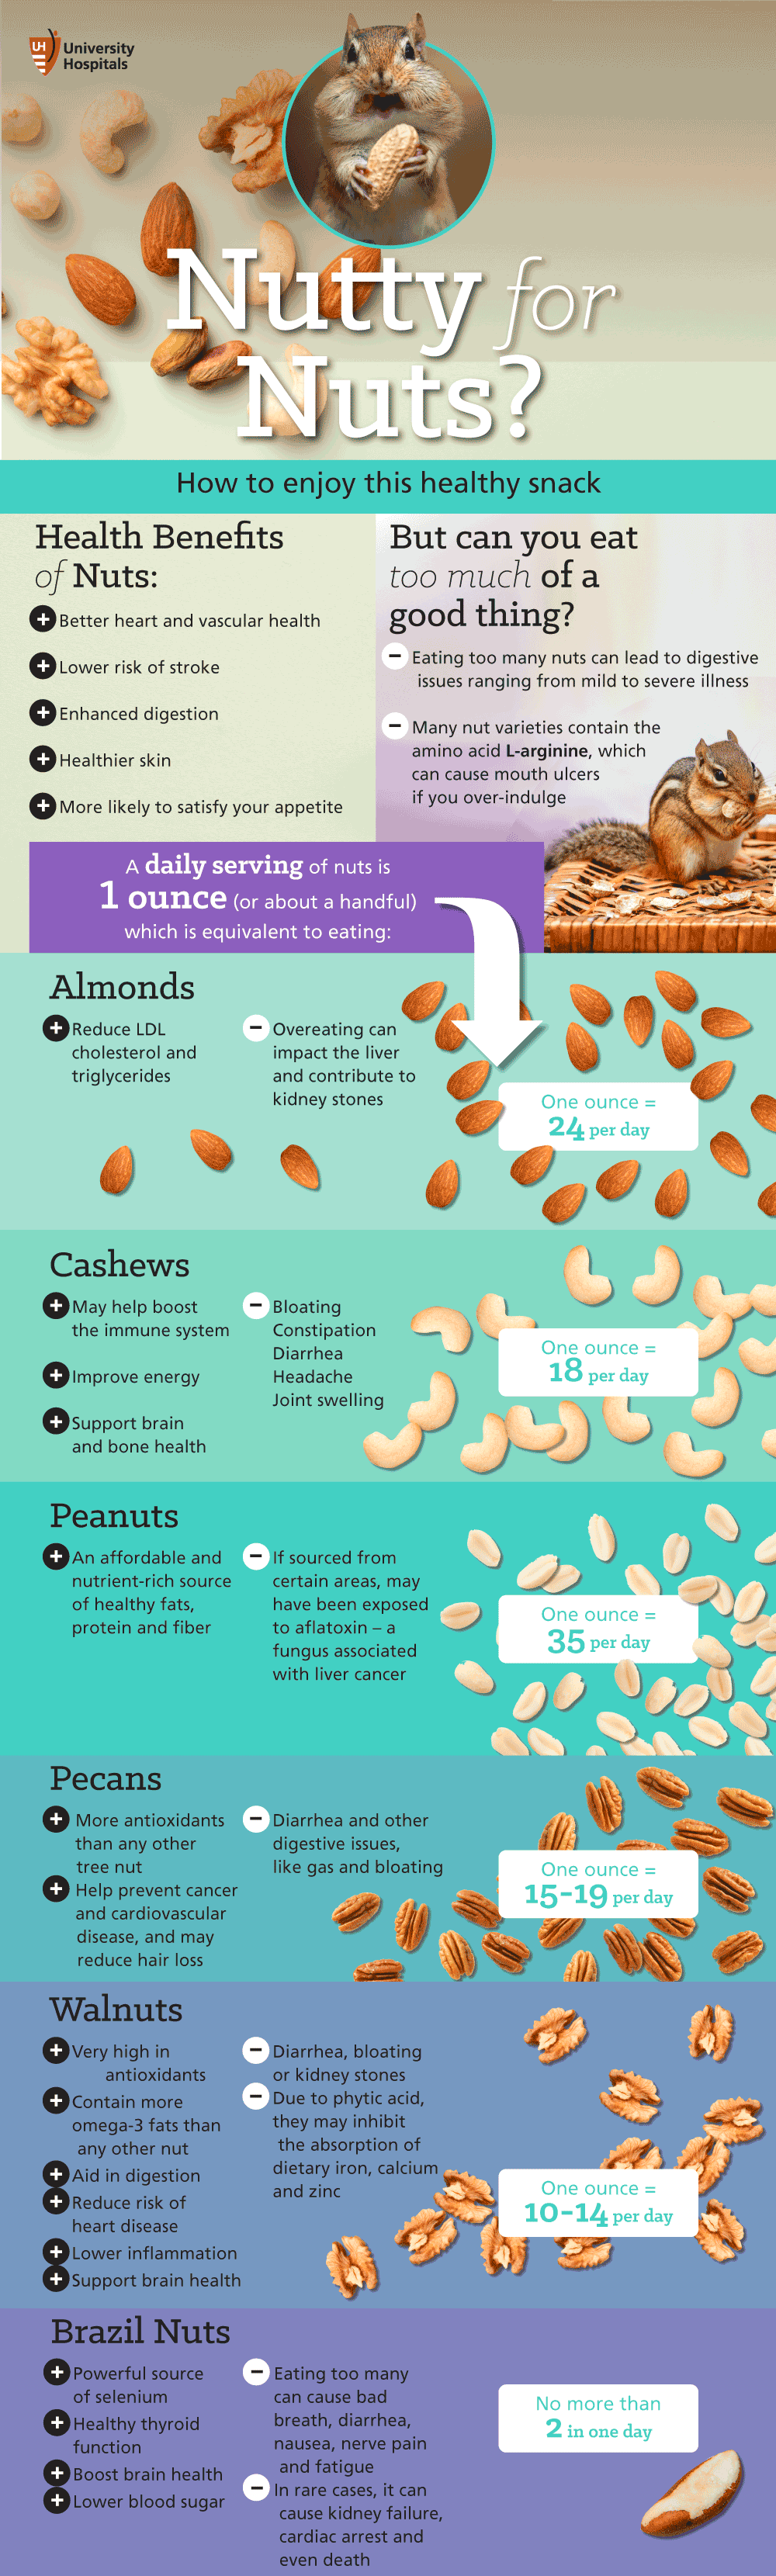 Infographic: Nutty for Nuts?